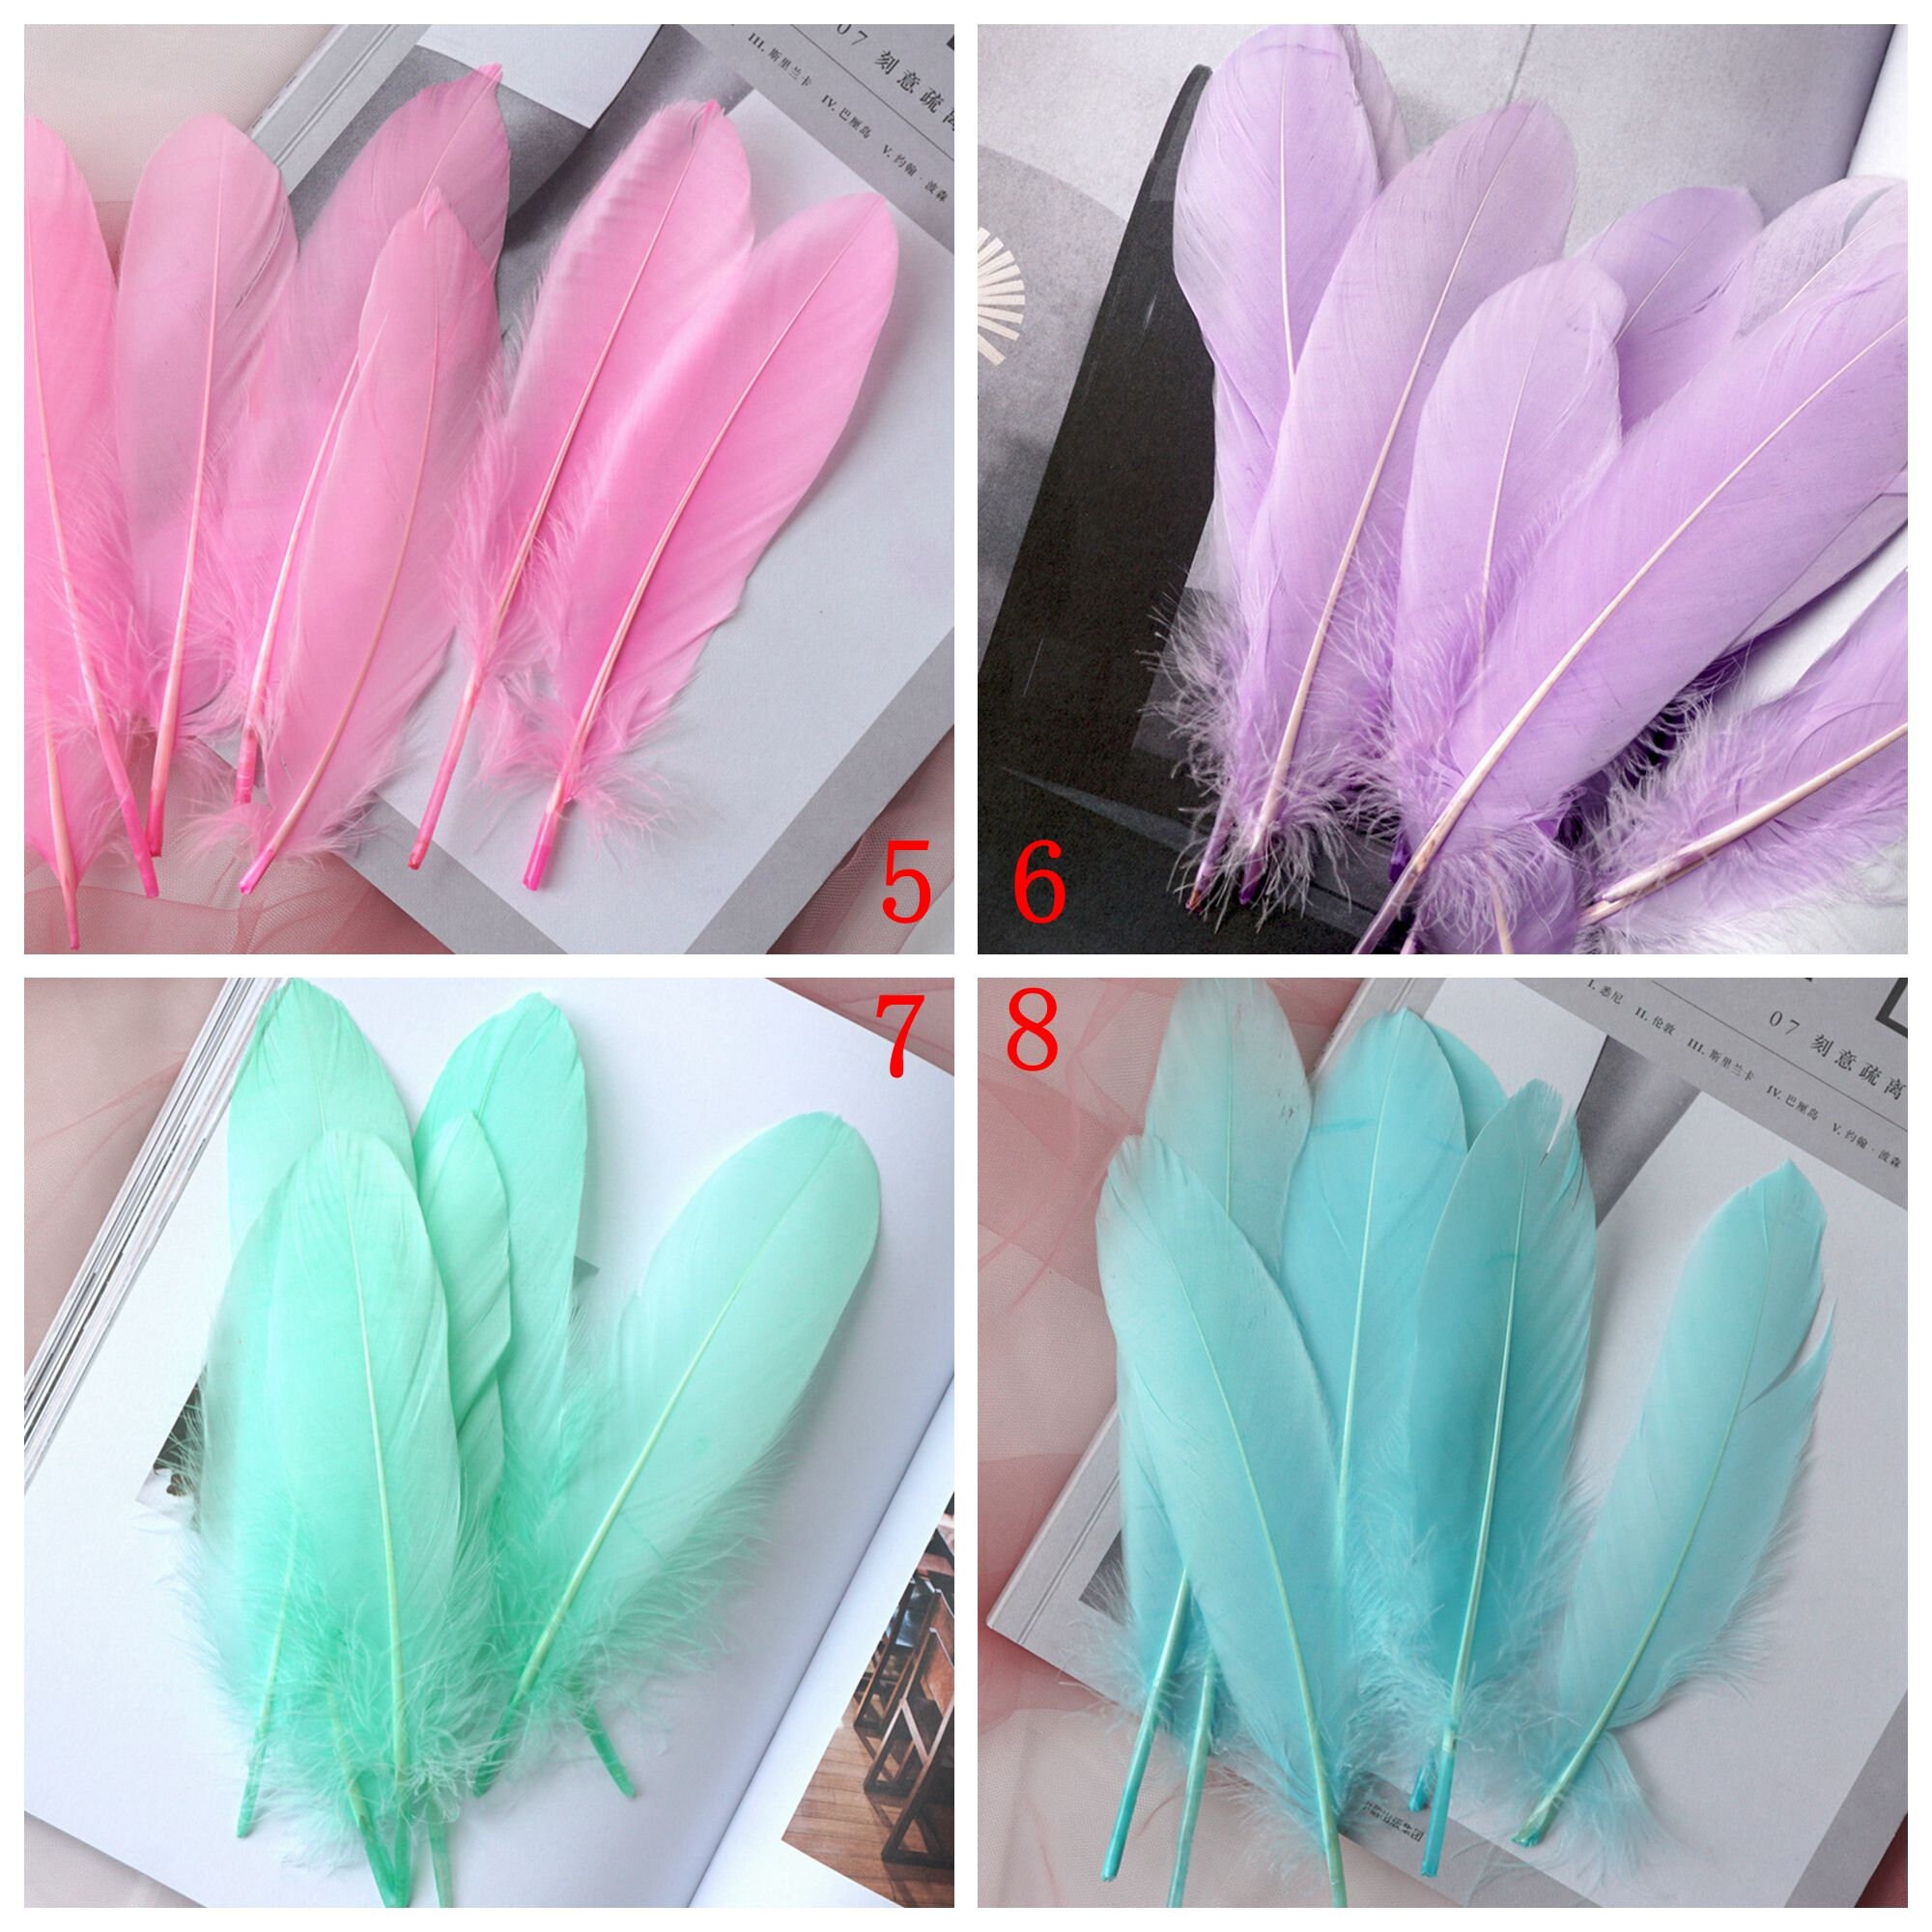 50pcs Large Hard Craft Feathers Assorted Colored for Hat - Etsy